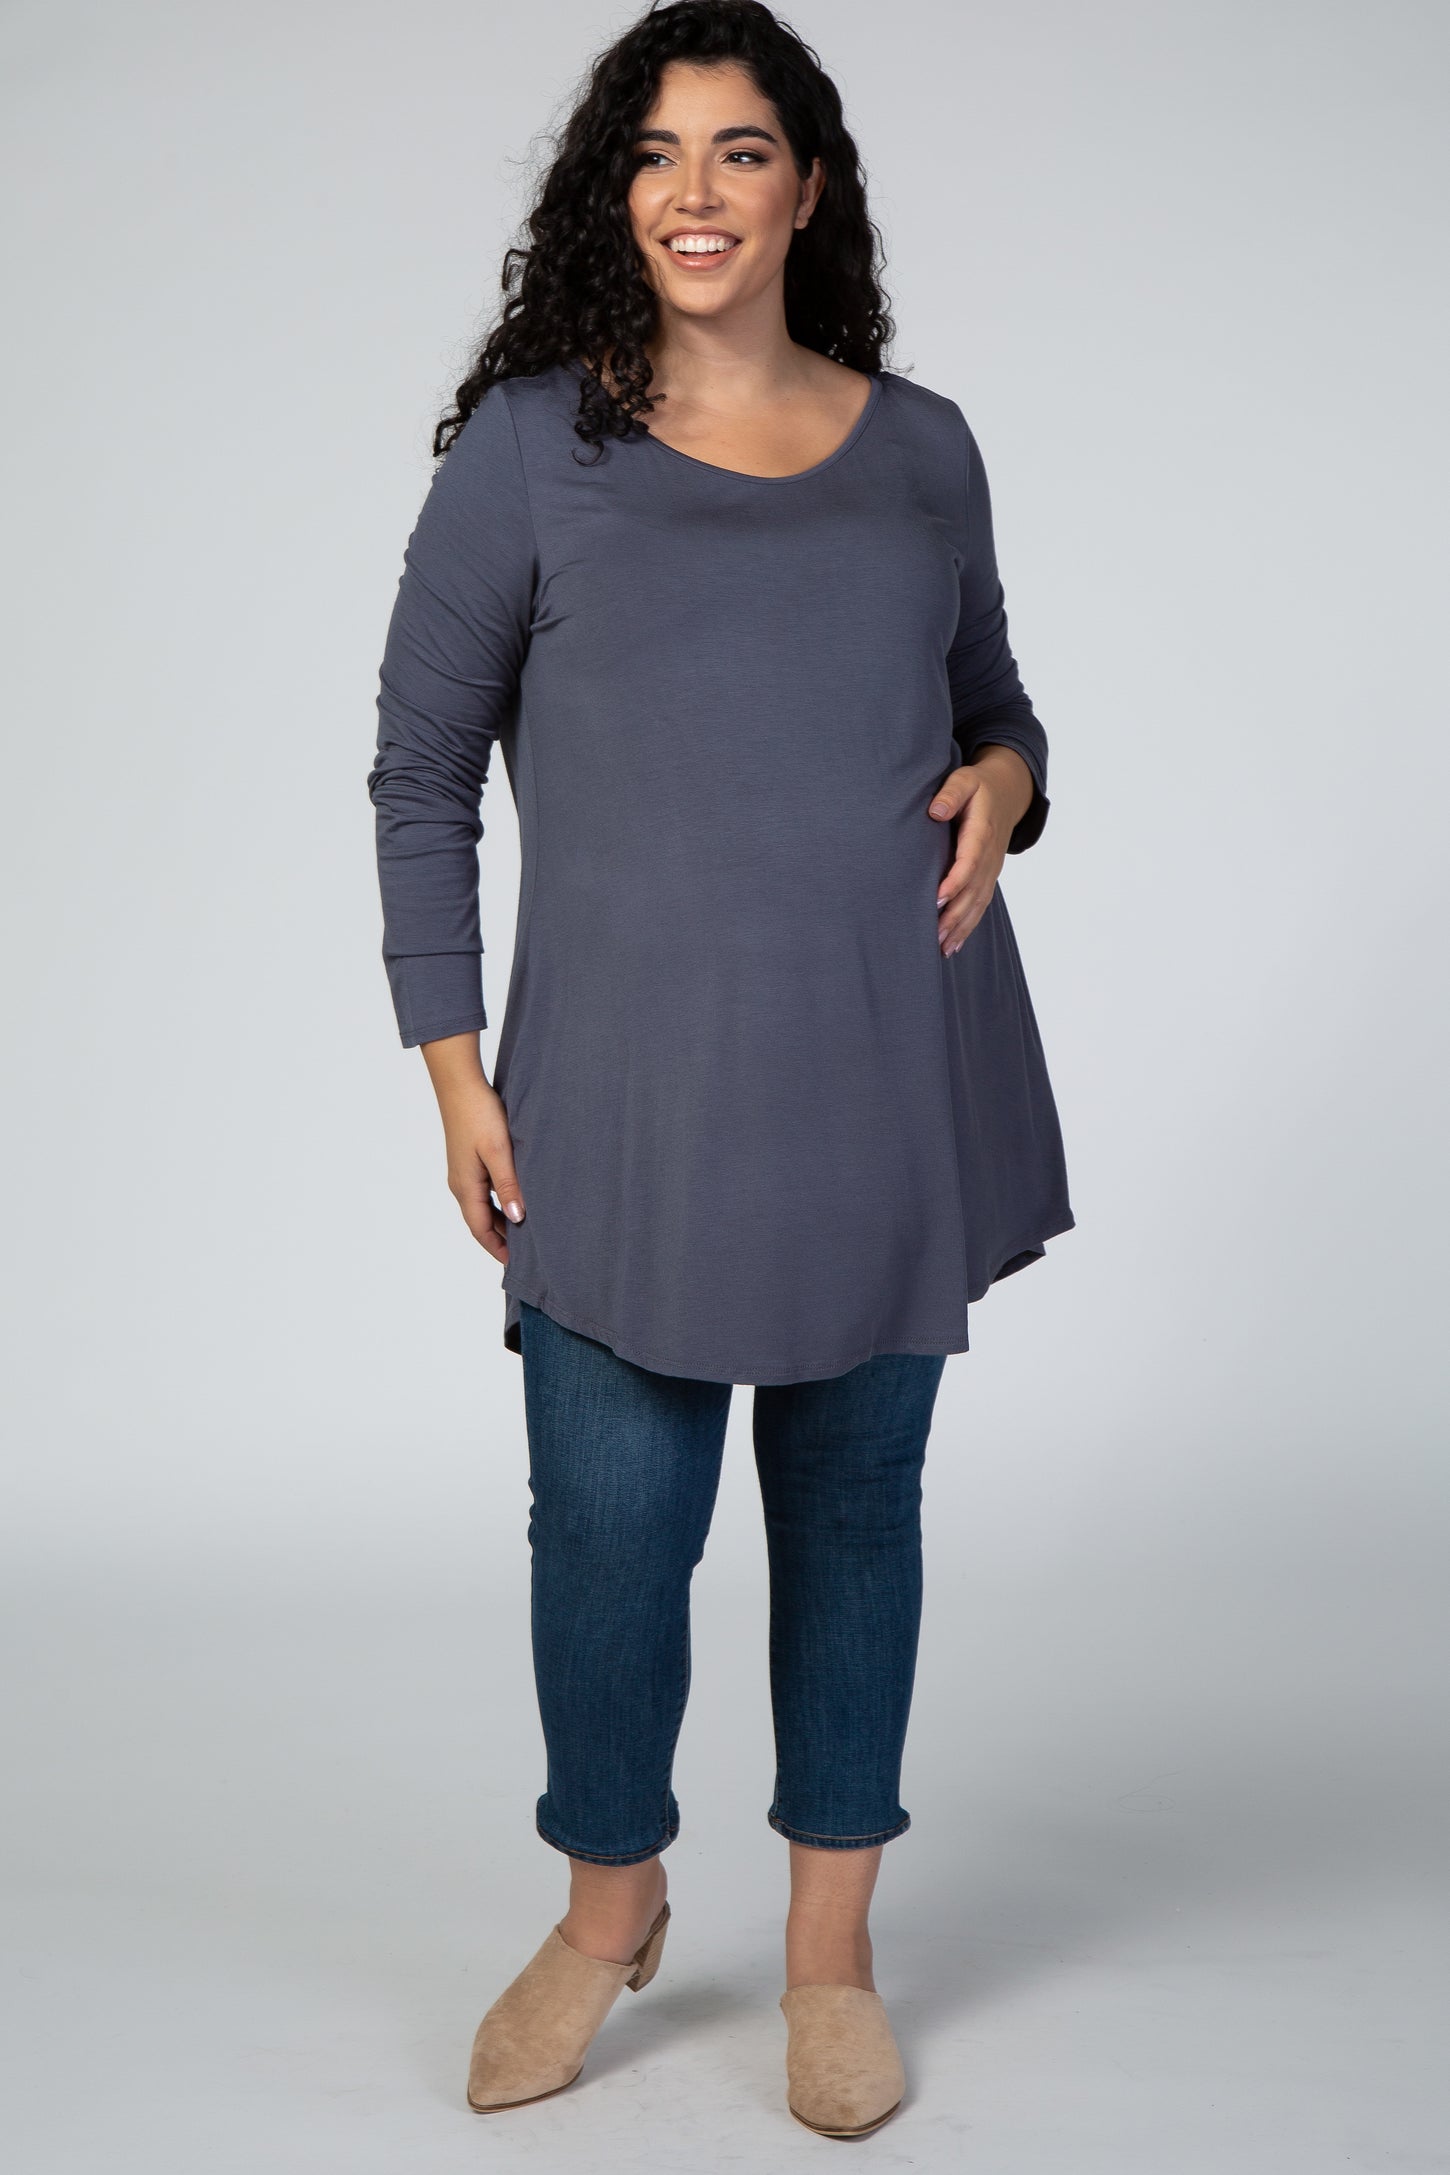 Charcoal Long Sleeve Bamboo Maternity Plus Size Top